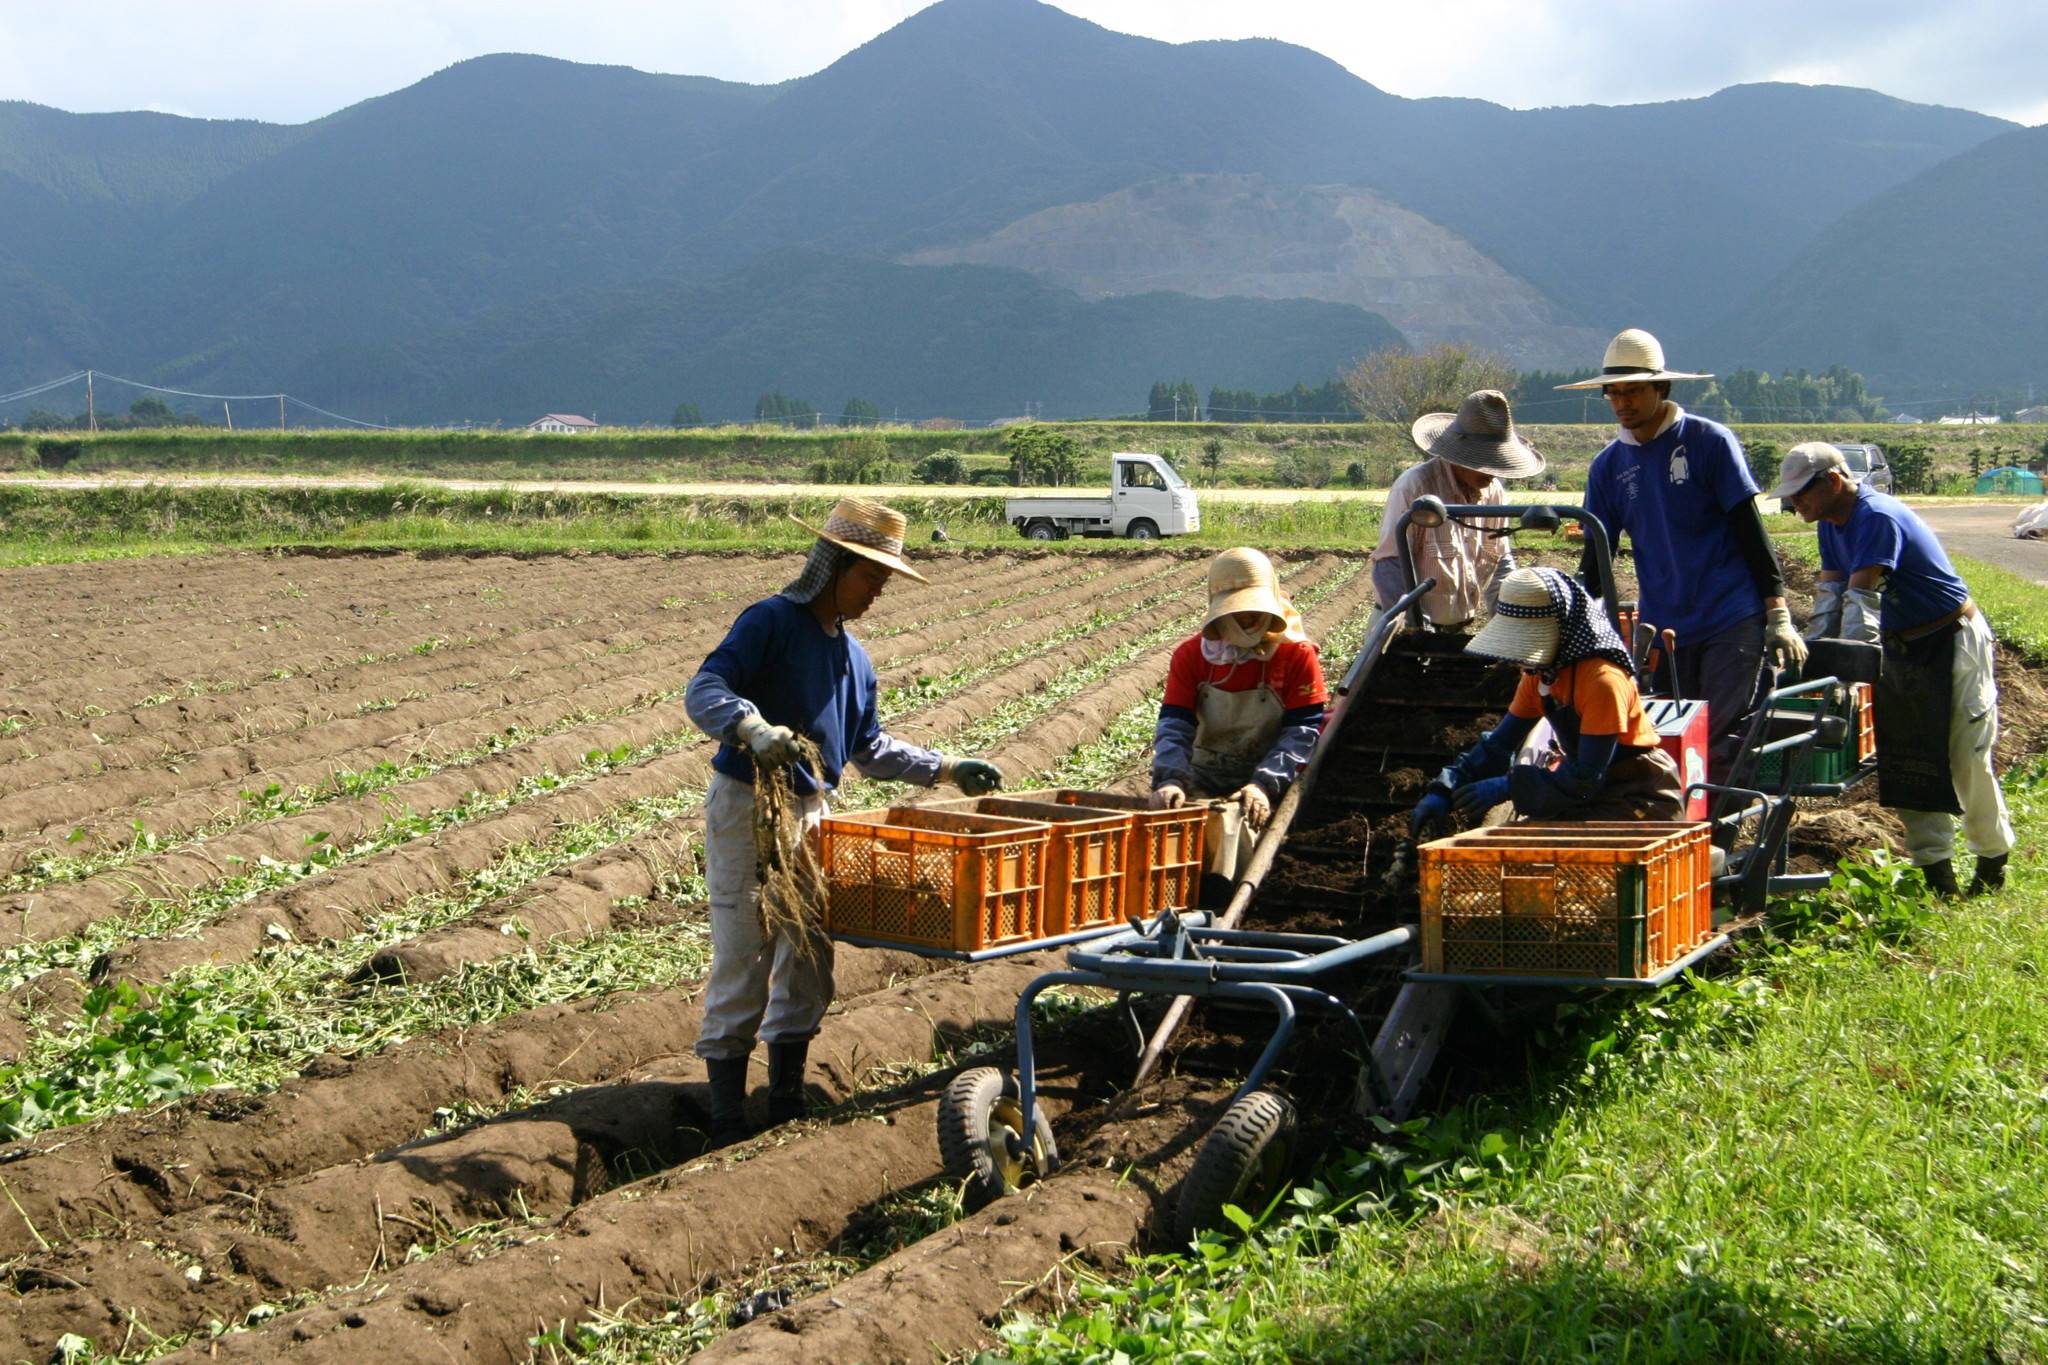 The Watanabe family at work in their fields. | COURTESY OF WATANABE DISTILLERY